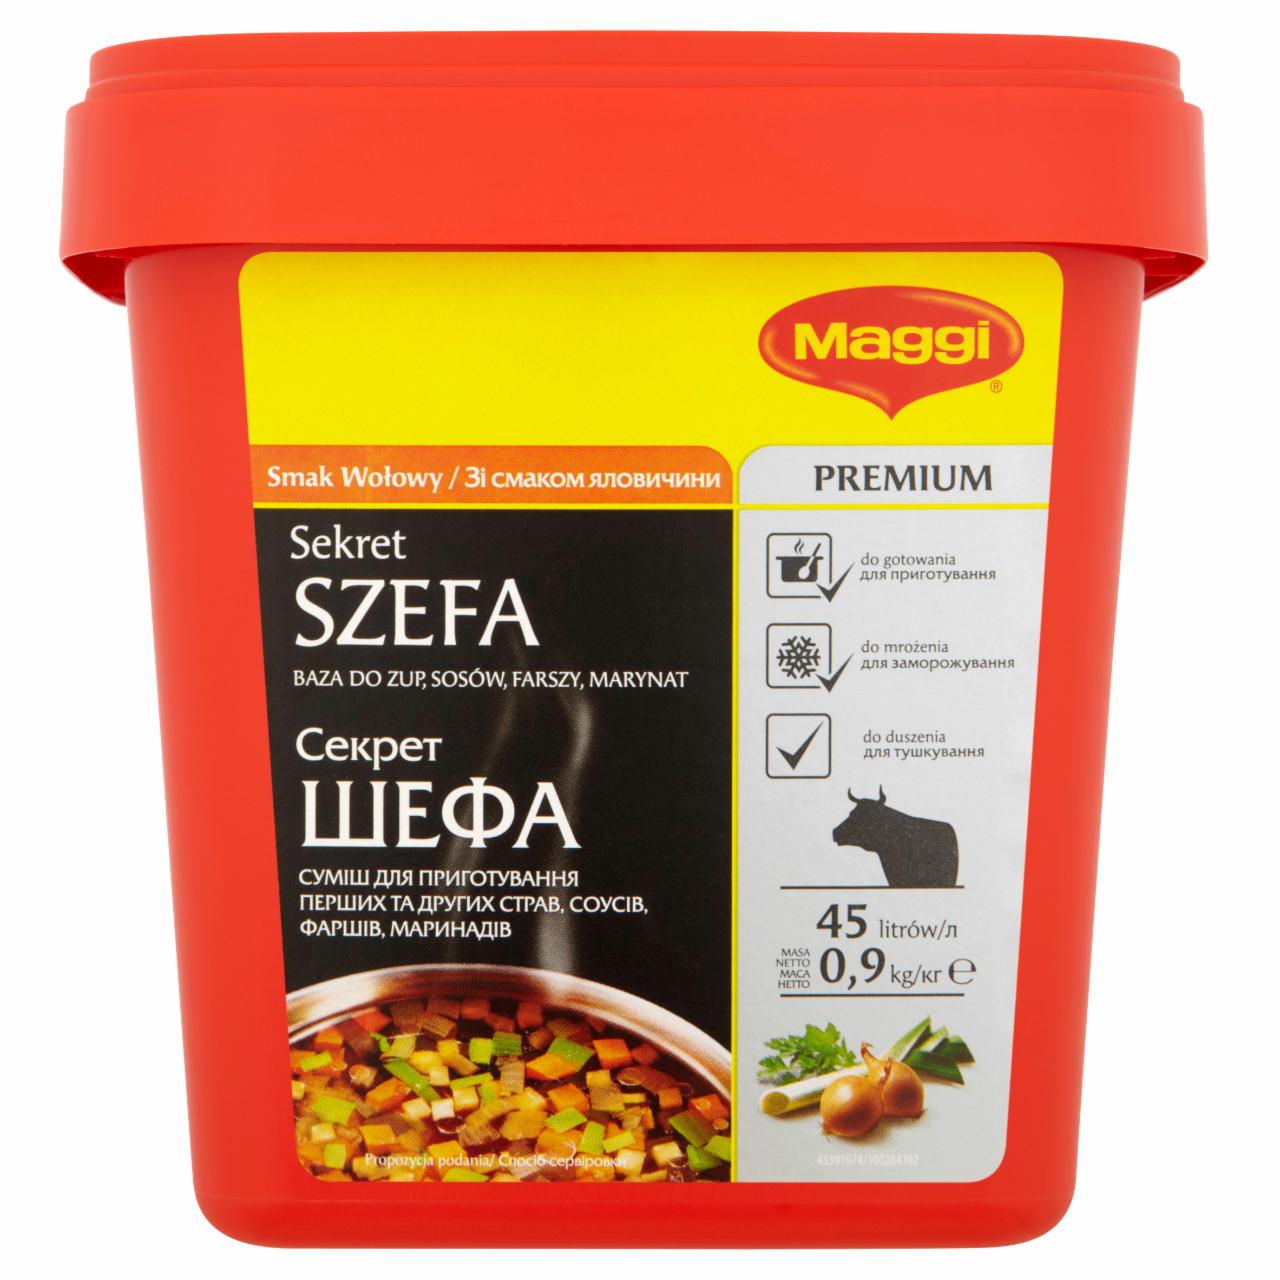 Photo - Maggi Chief Secret Beef Flavour Soups Sauces Stuffing Marinade Base 900 g